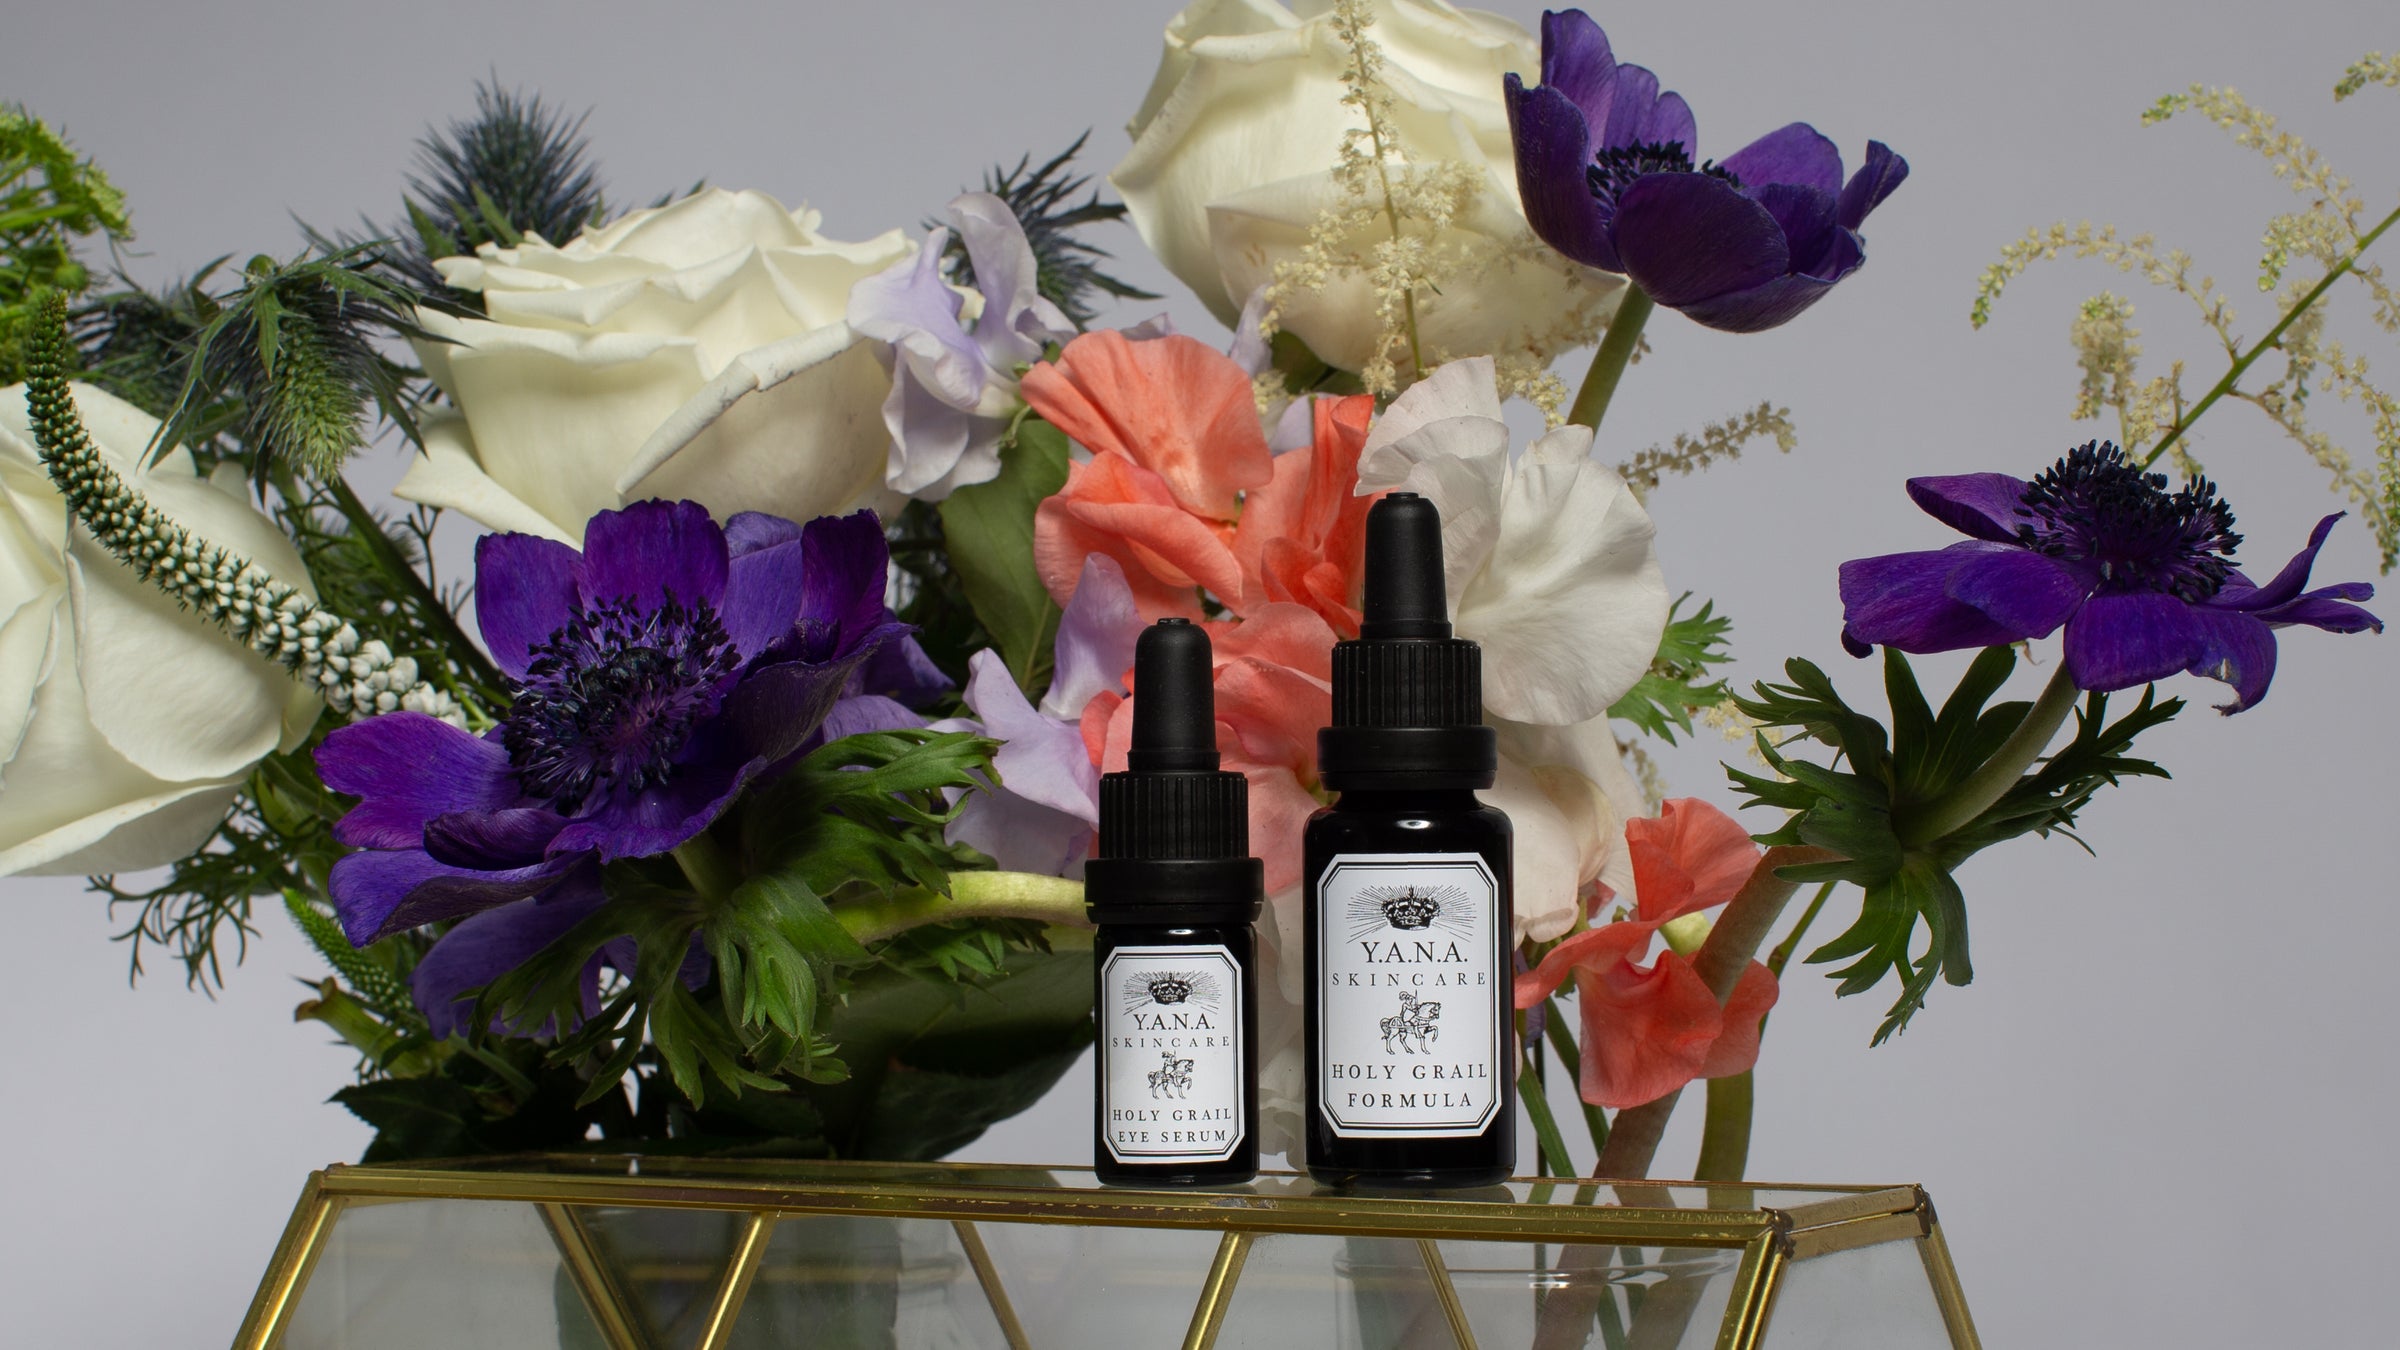 Two Yana Skincare Holy Grail Serum bottles on a glass cabinet surrounded by white roses, purple poppies, and other various flowers.